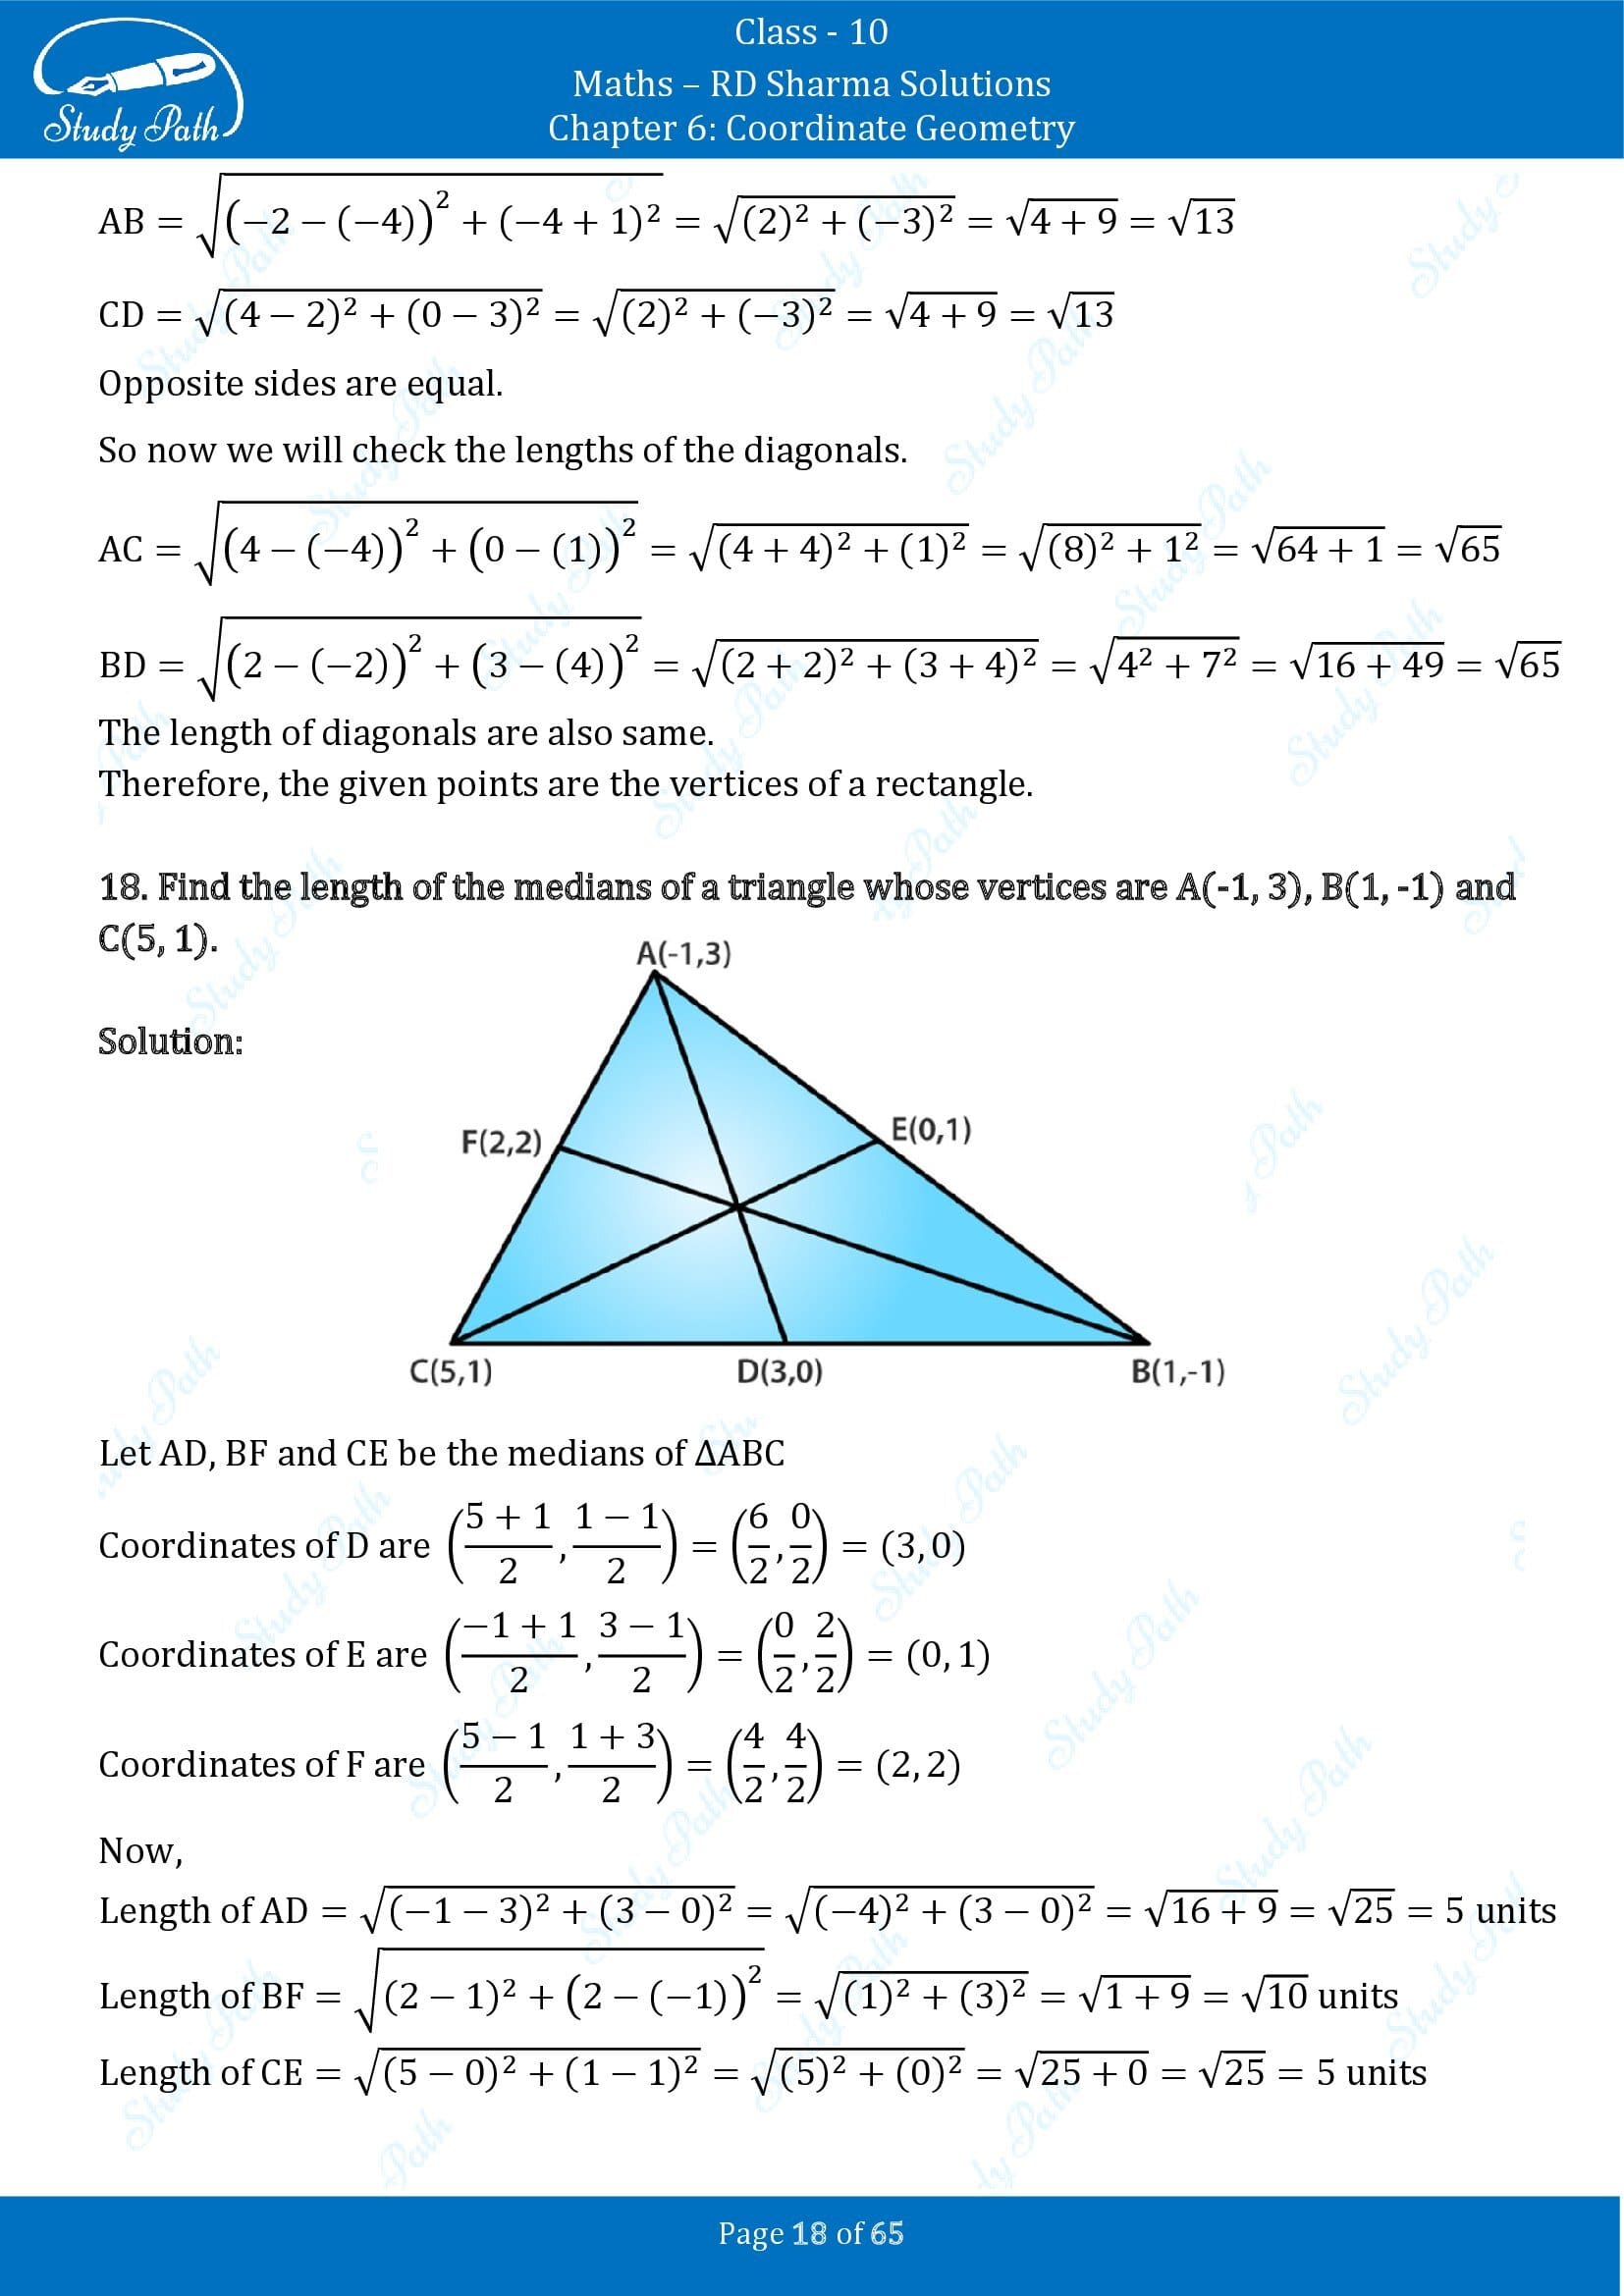 RD Sharma Solutions Class 10 Chapter 6 Coordinate Geometry Exercise 6.3 00018